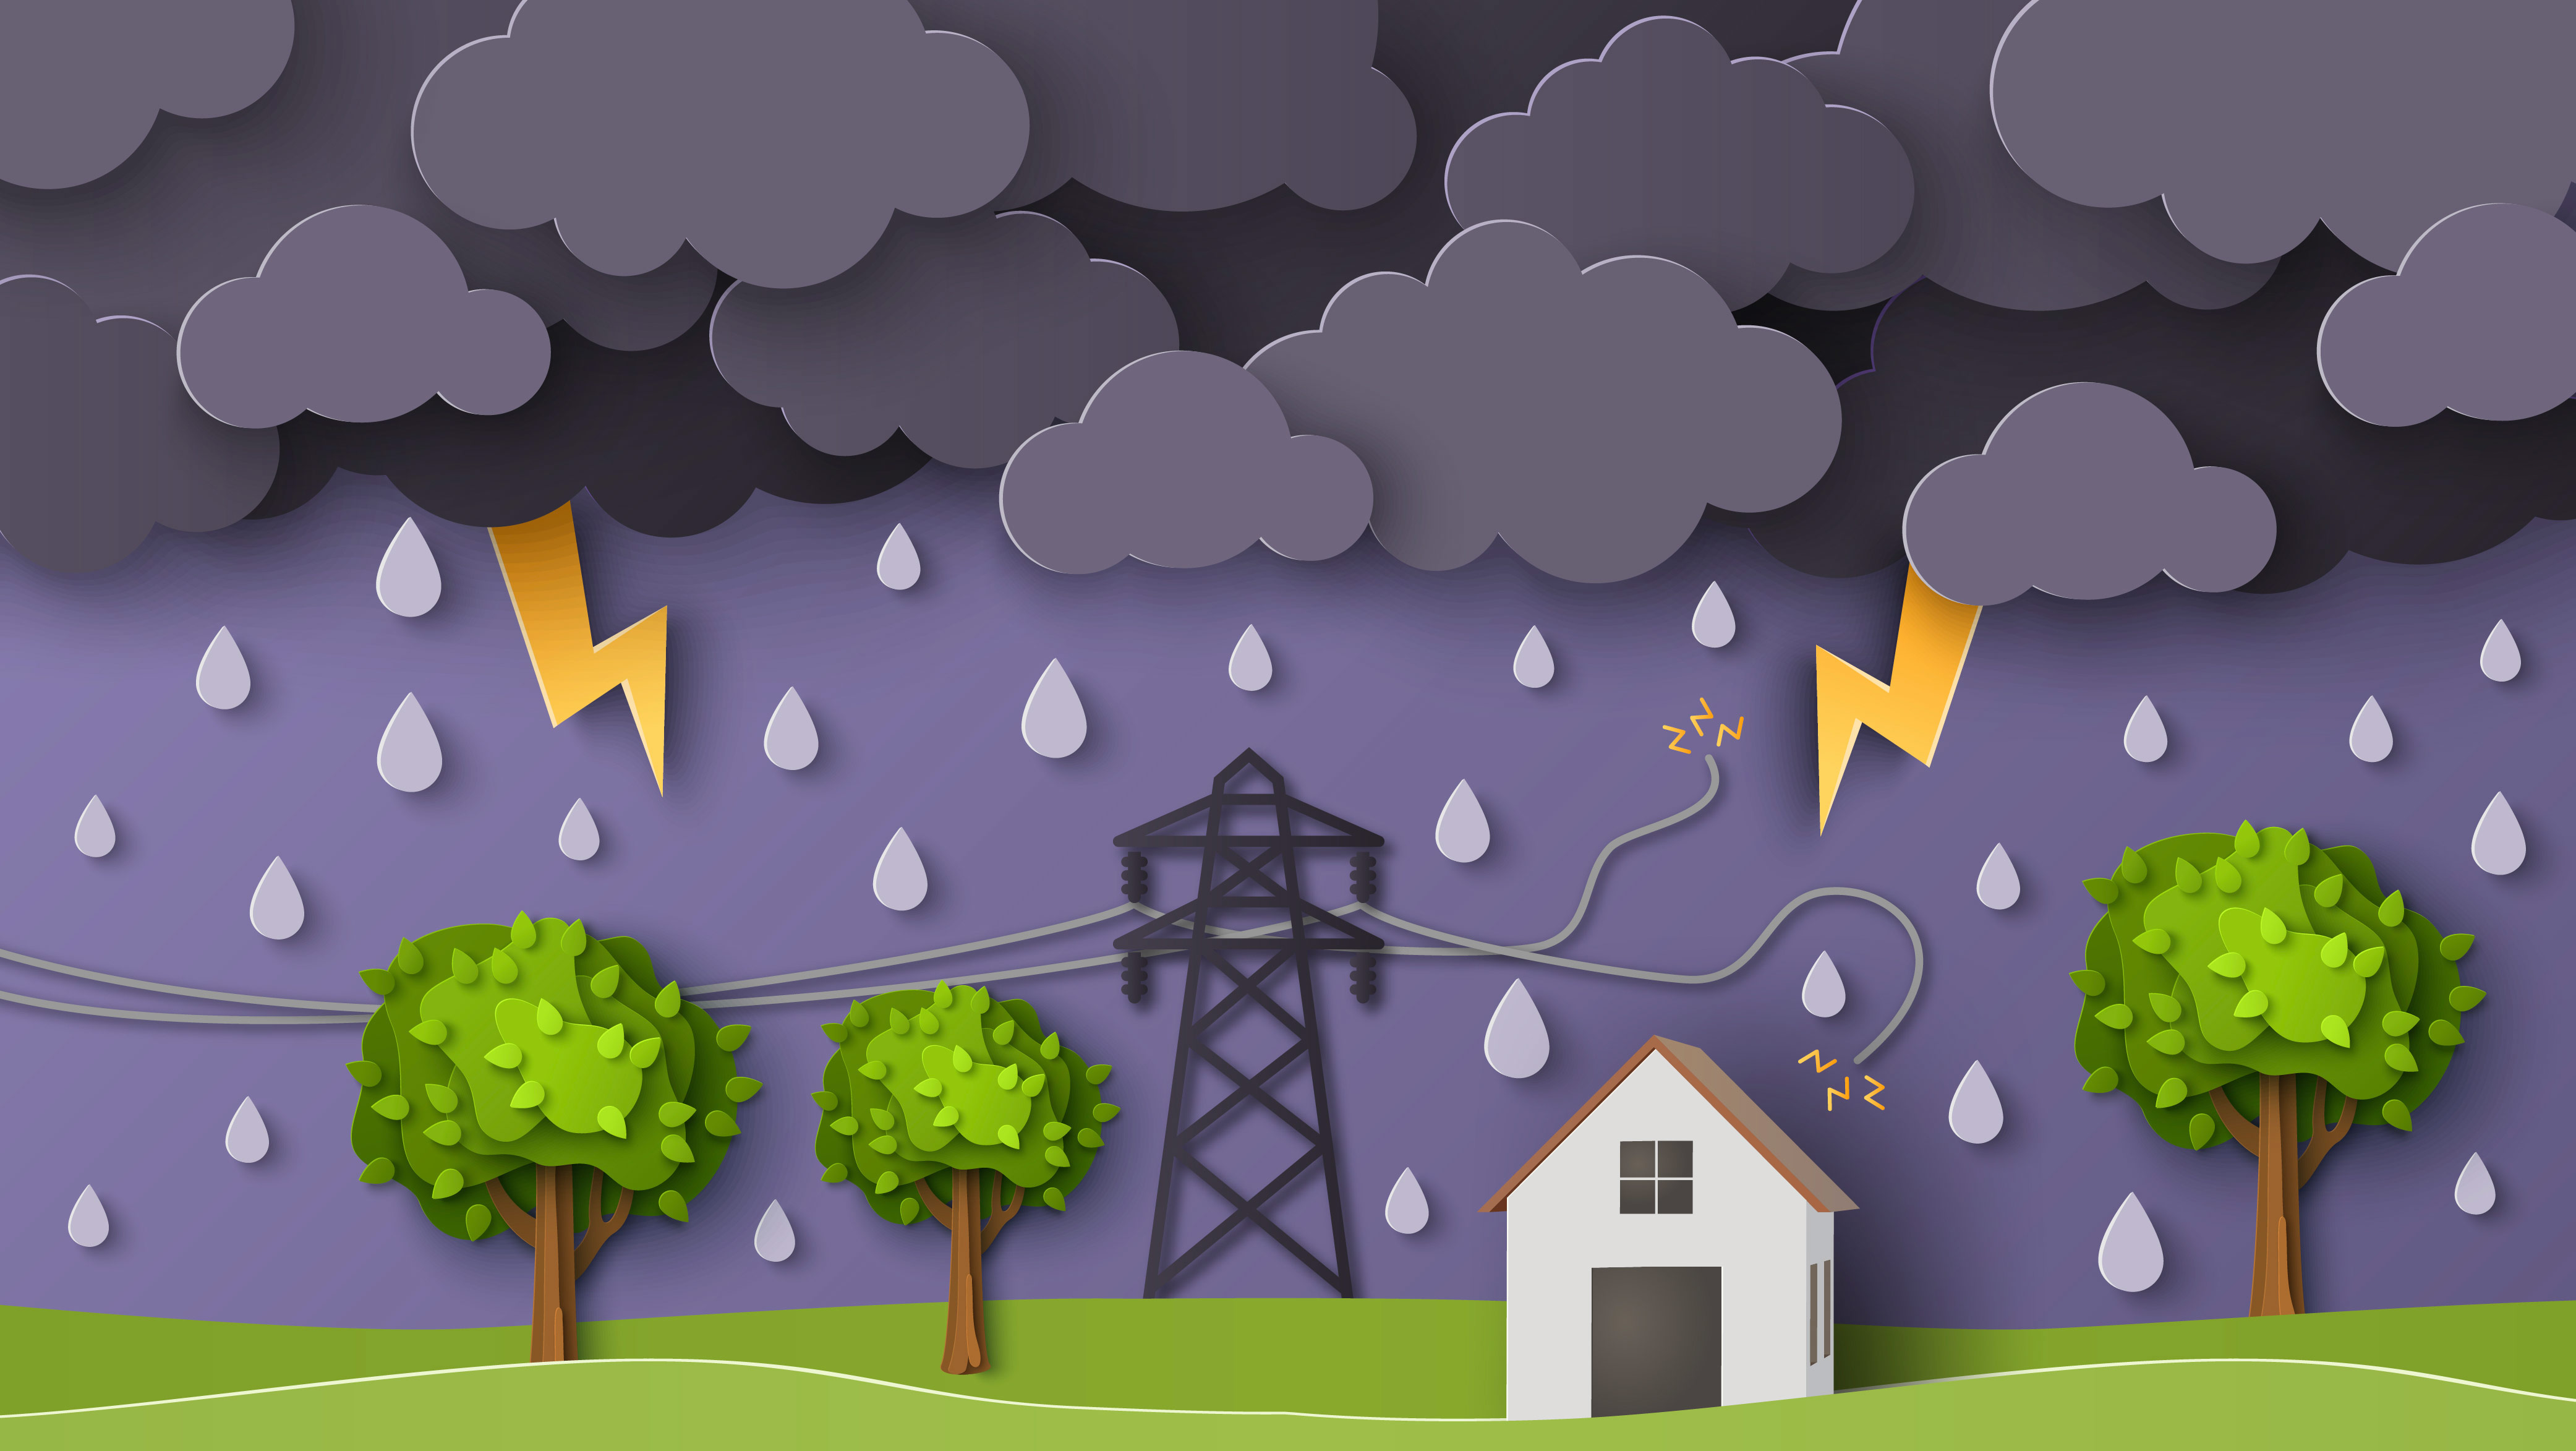 Illustration of a thunderstorm with raindrops and lightning over a landscape featuring trees, a house, and power lines.